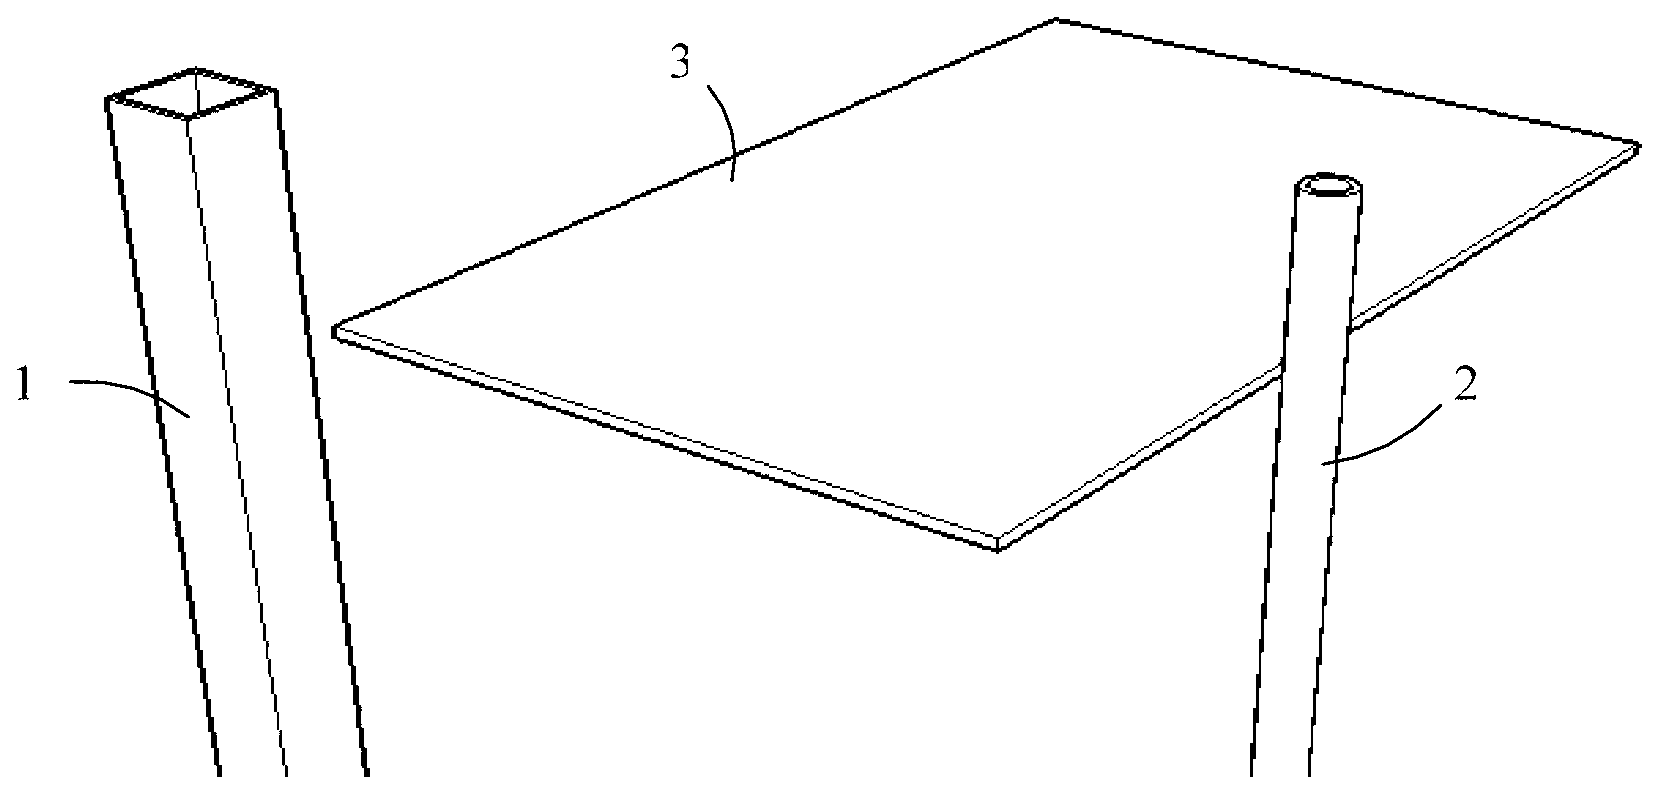 Embedded interpenetration type structural member and embedded interpenetration type structural member for paper furniture